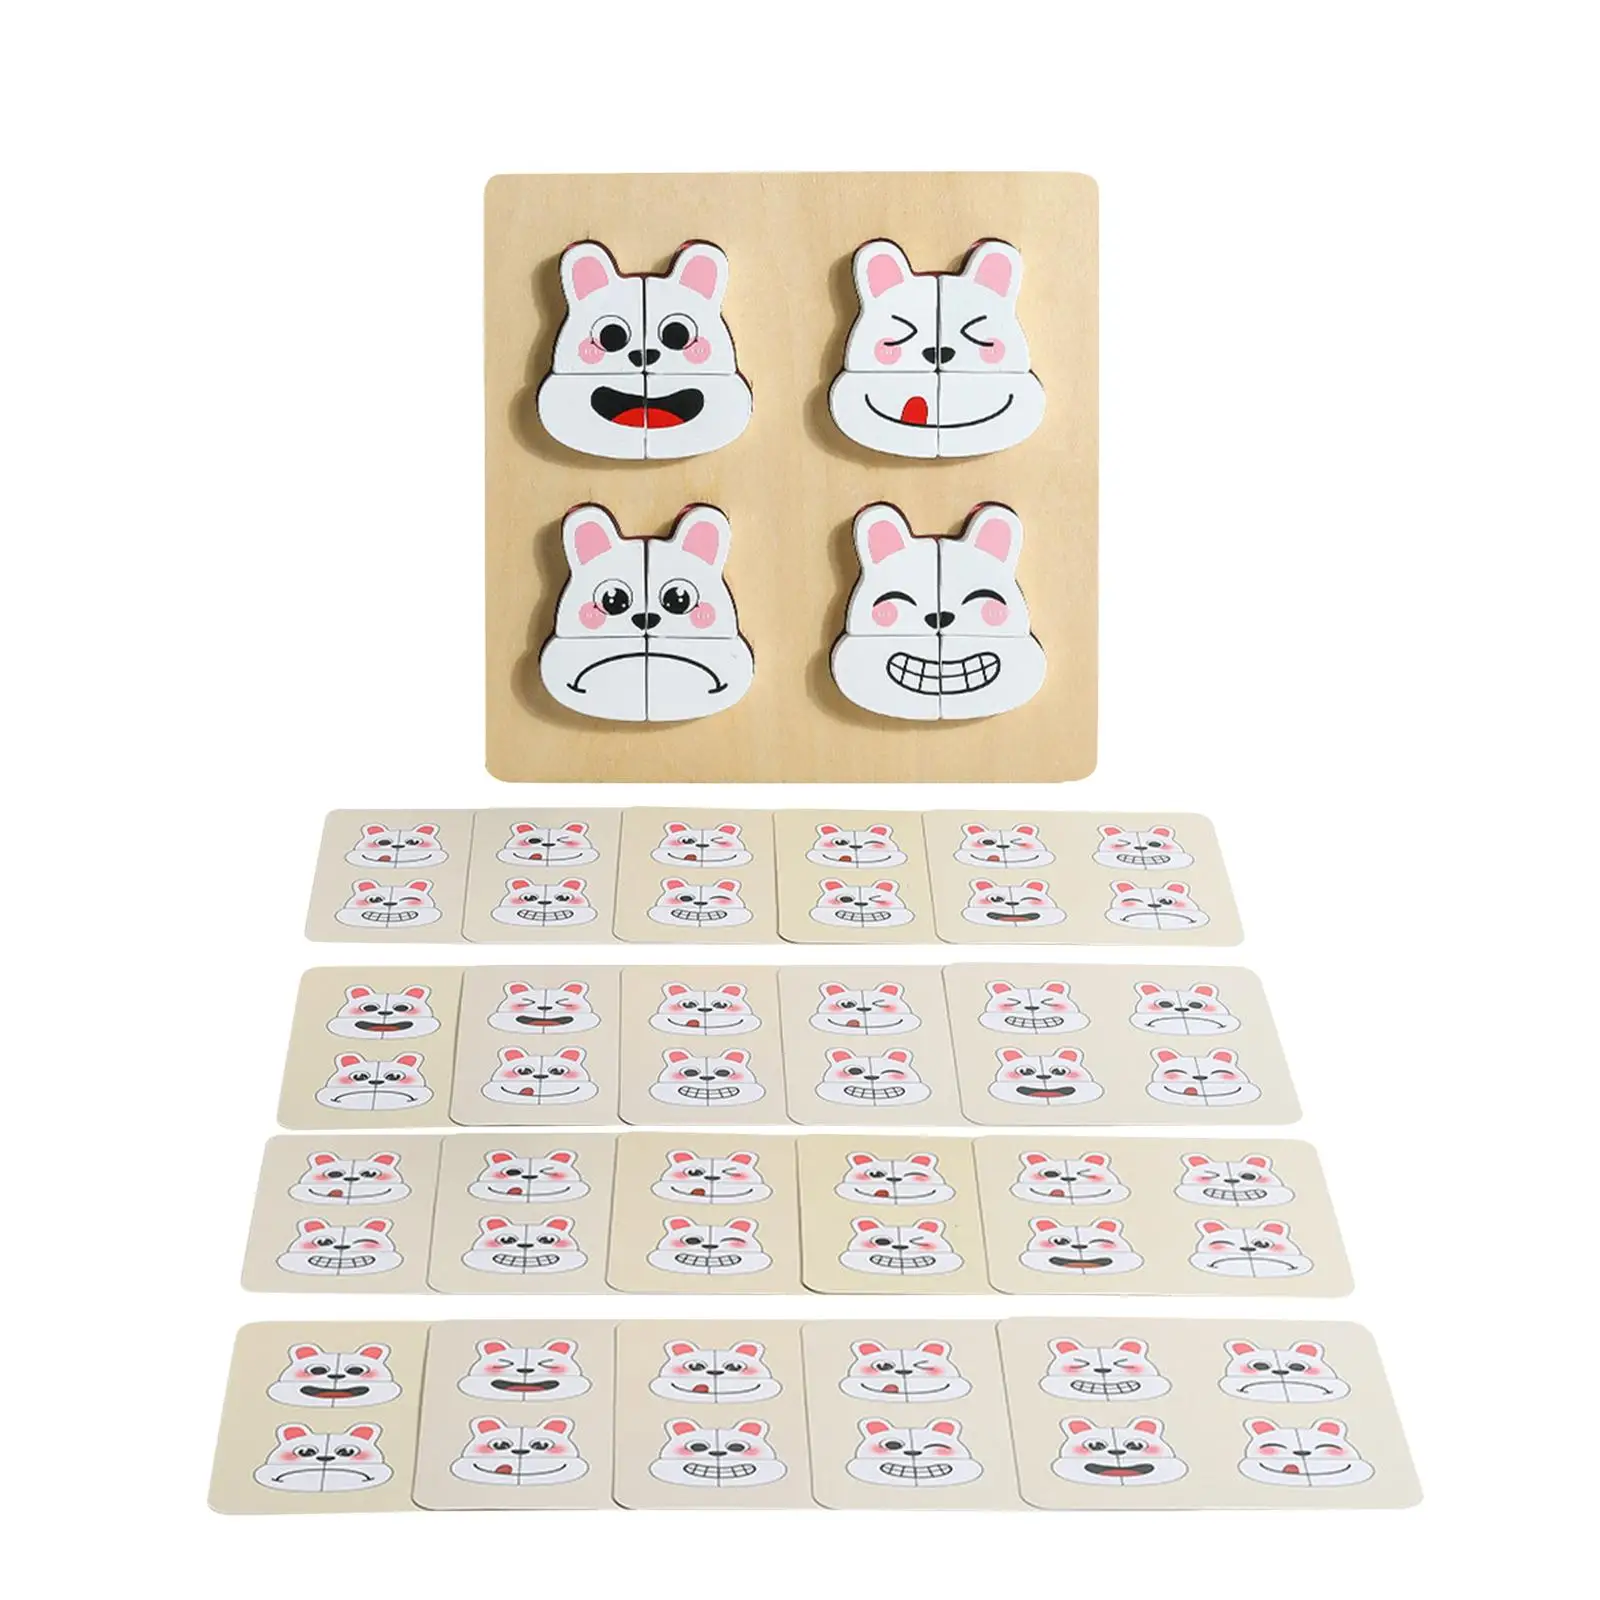 

Rabbit Bunny Jigsaw Puzzle Matching Toys with Cards Early Developmental Toys Montessori Toys Wooden for Baby Toddlers Kids